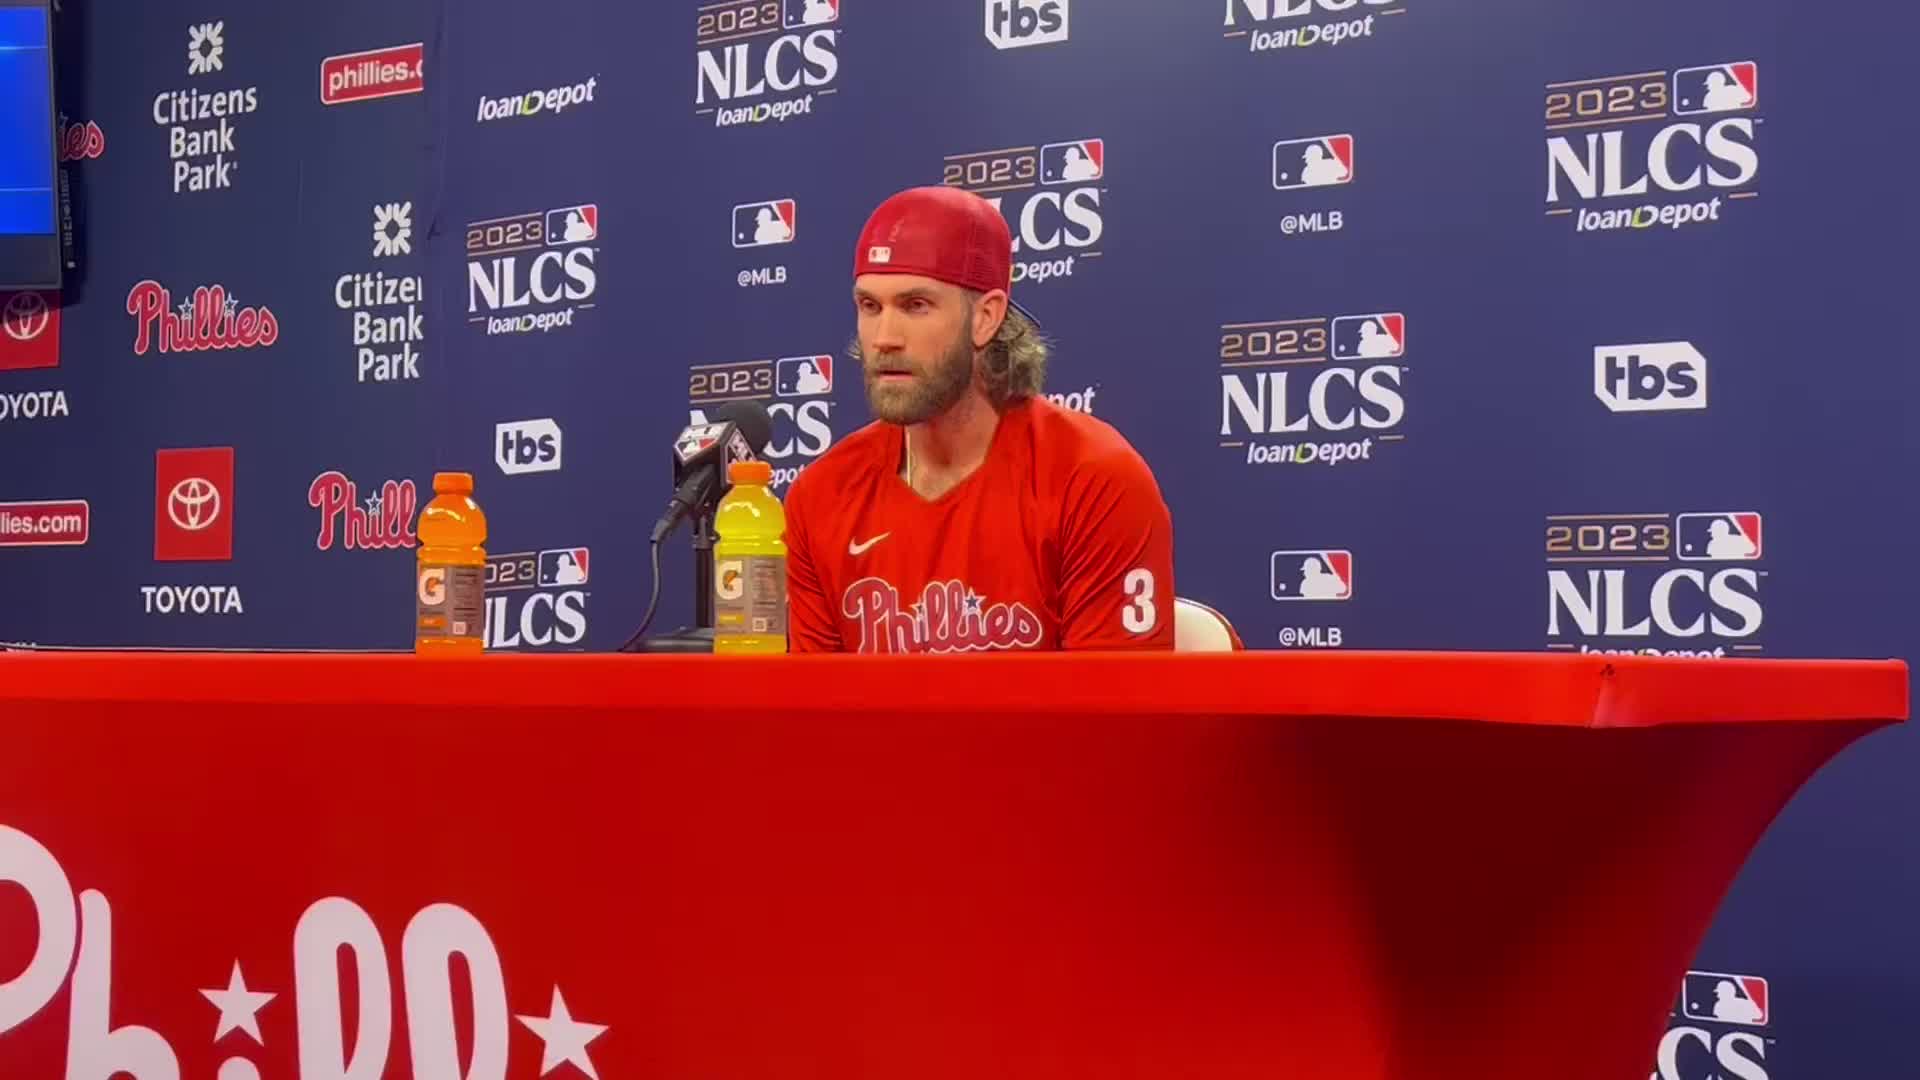 Phillies' Tom McCarthy, NBC Sports Philly captured Michael Lorenzen's  no-hitter vs. Nationals perfectly